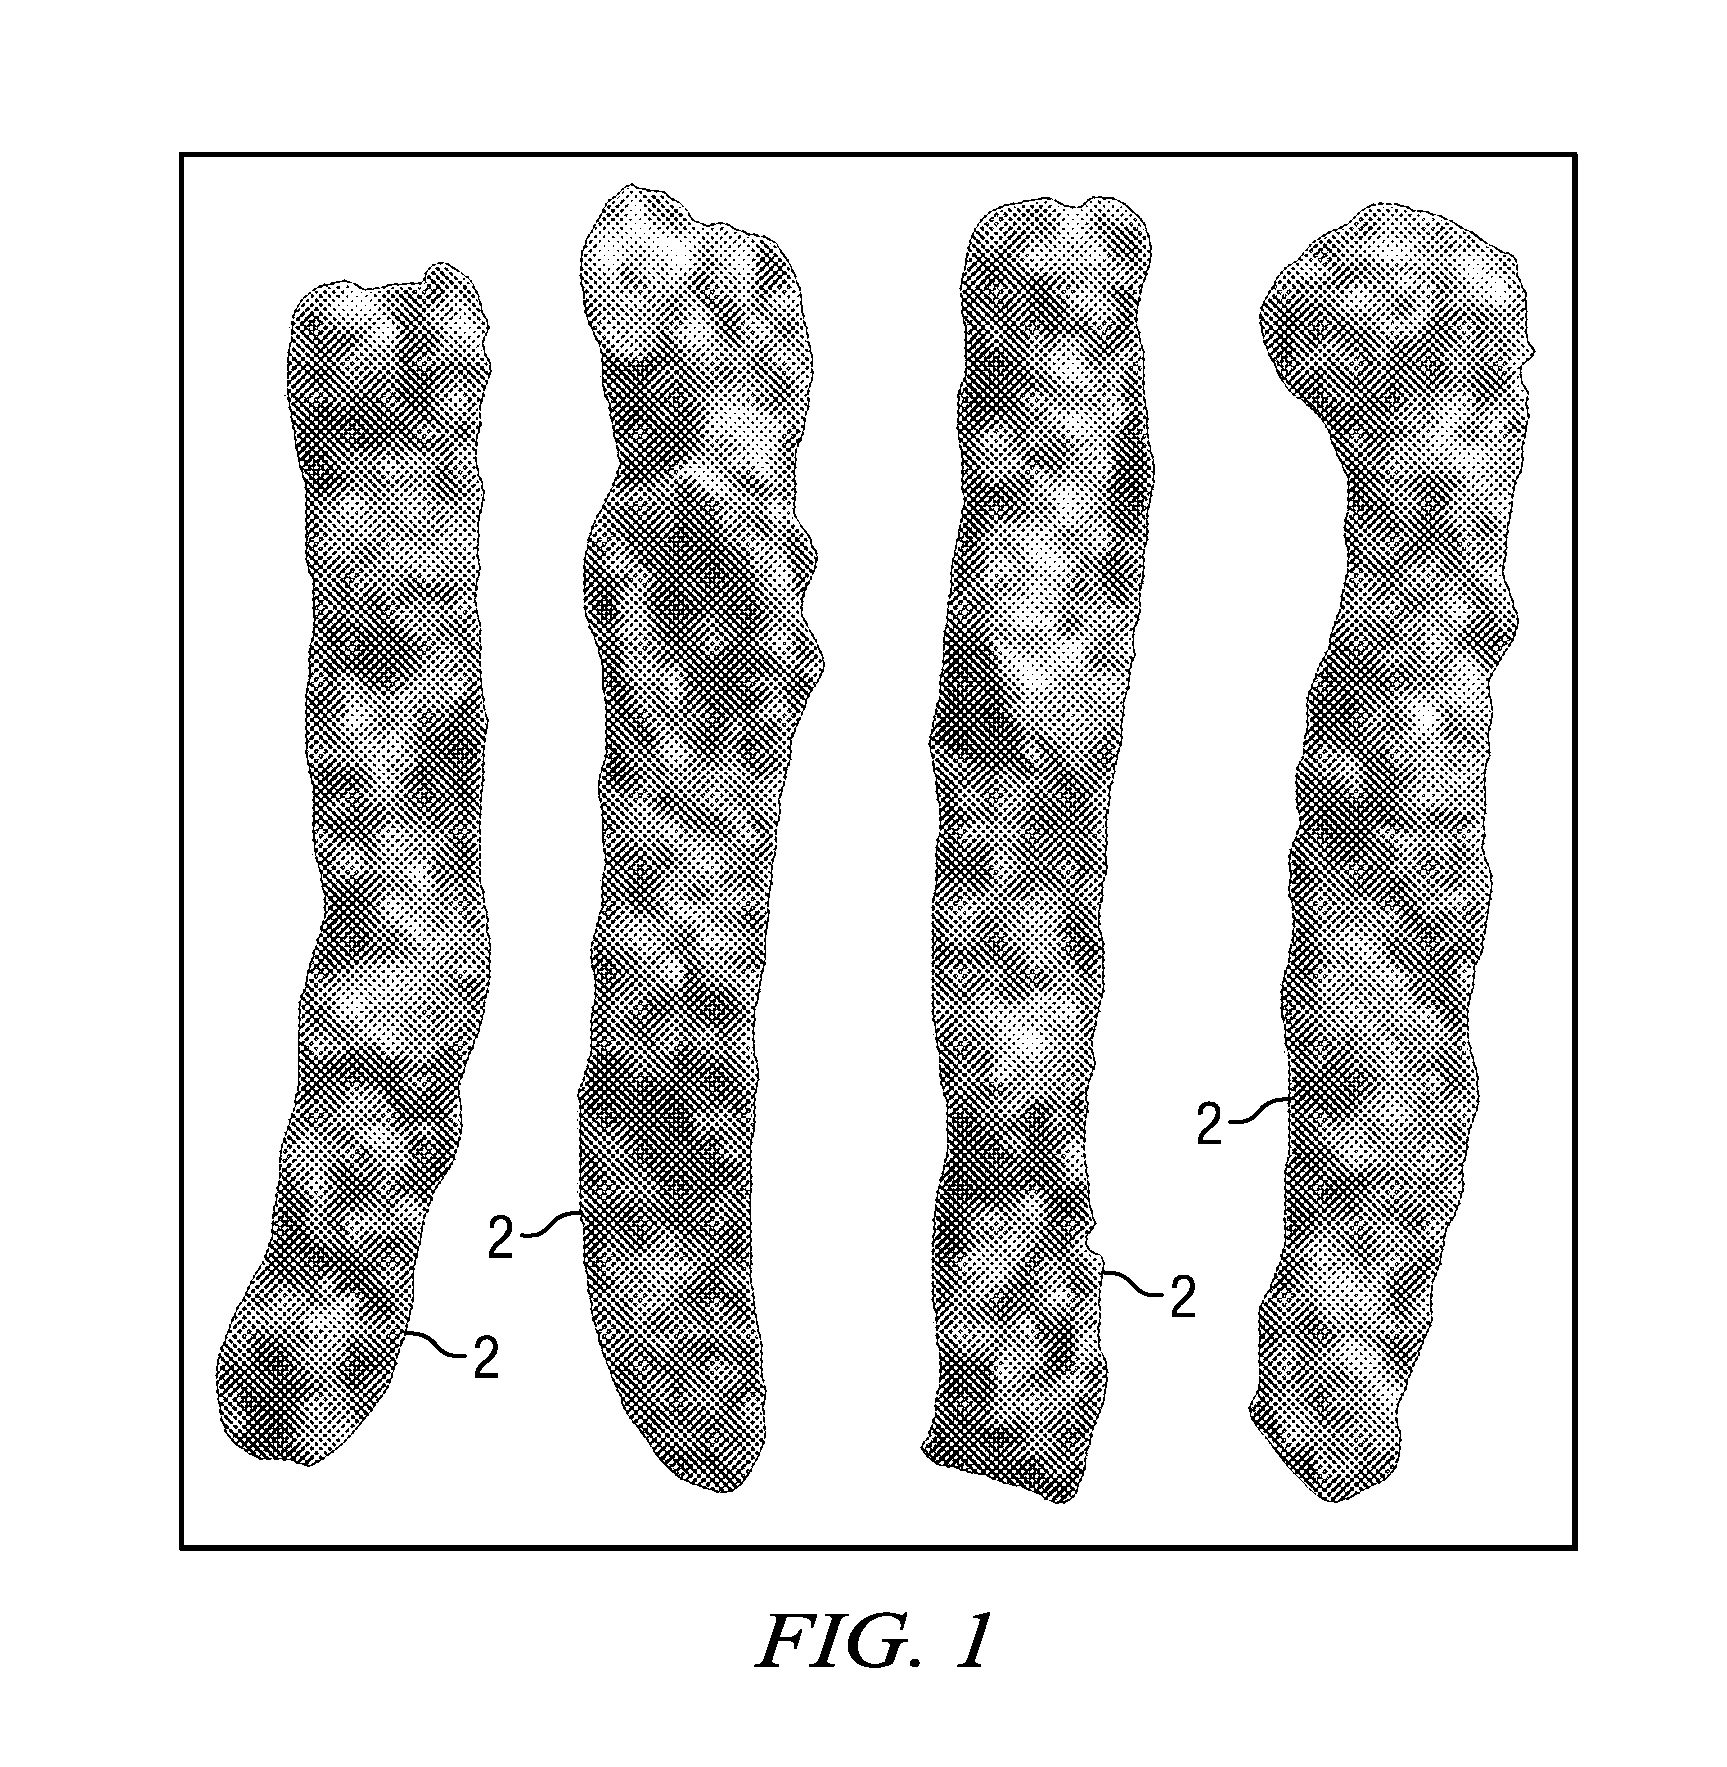 Micropellets of Fine Particle Nutrients and Methods of Incorporating Same into Snack Food Products